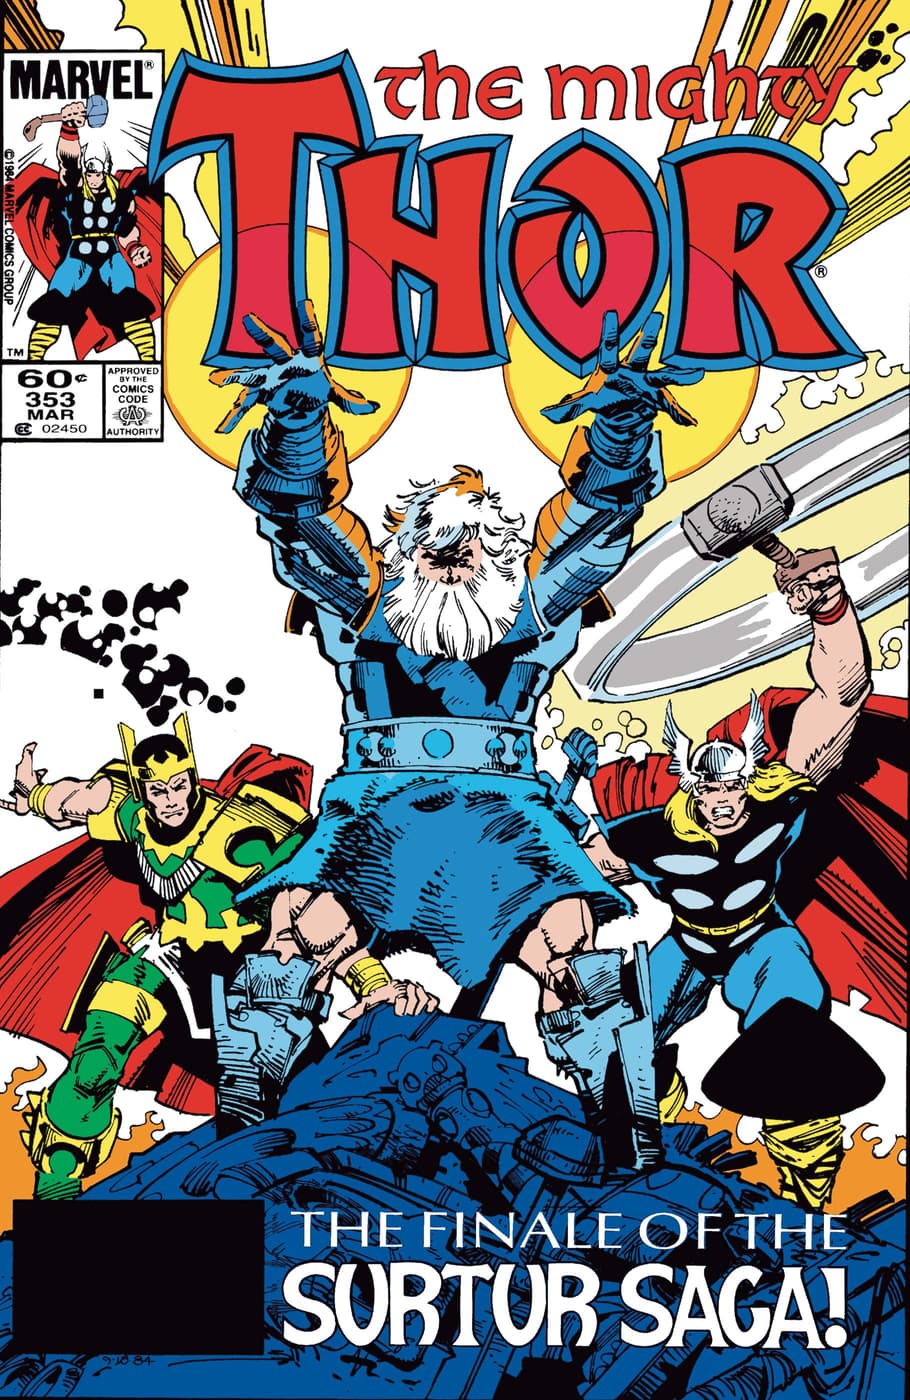 Thor (1966) #353 cover by Walter Simonson